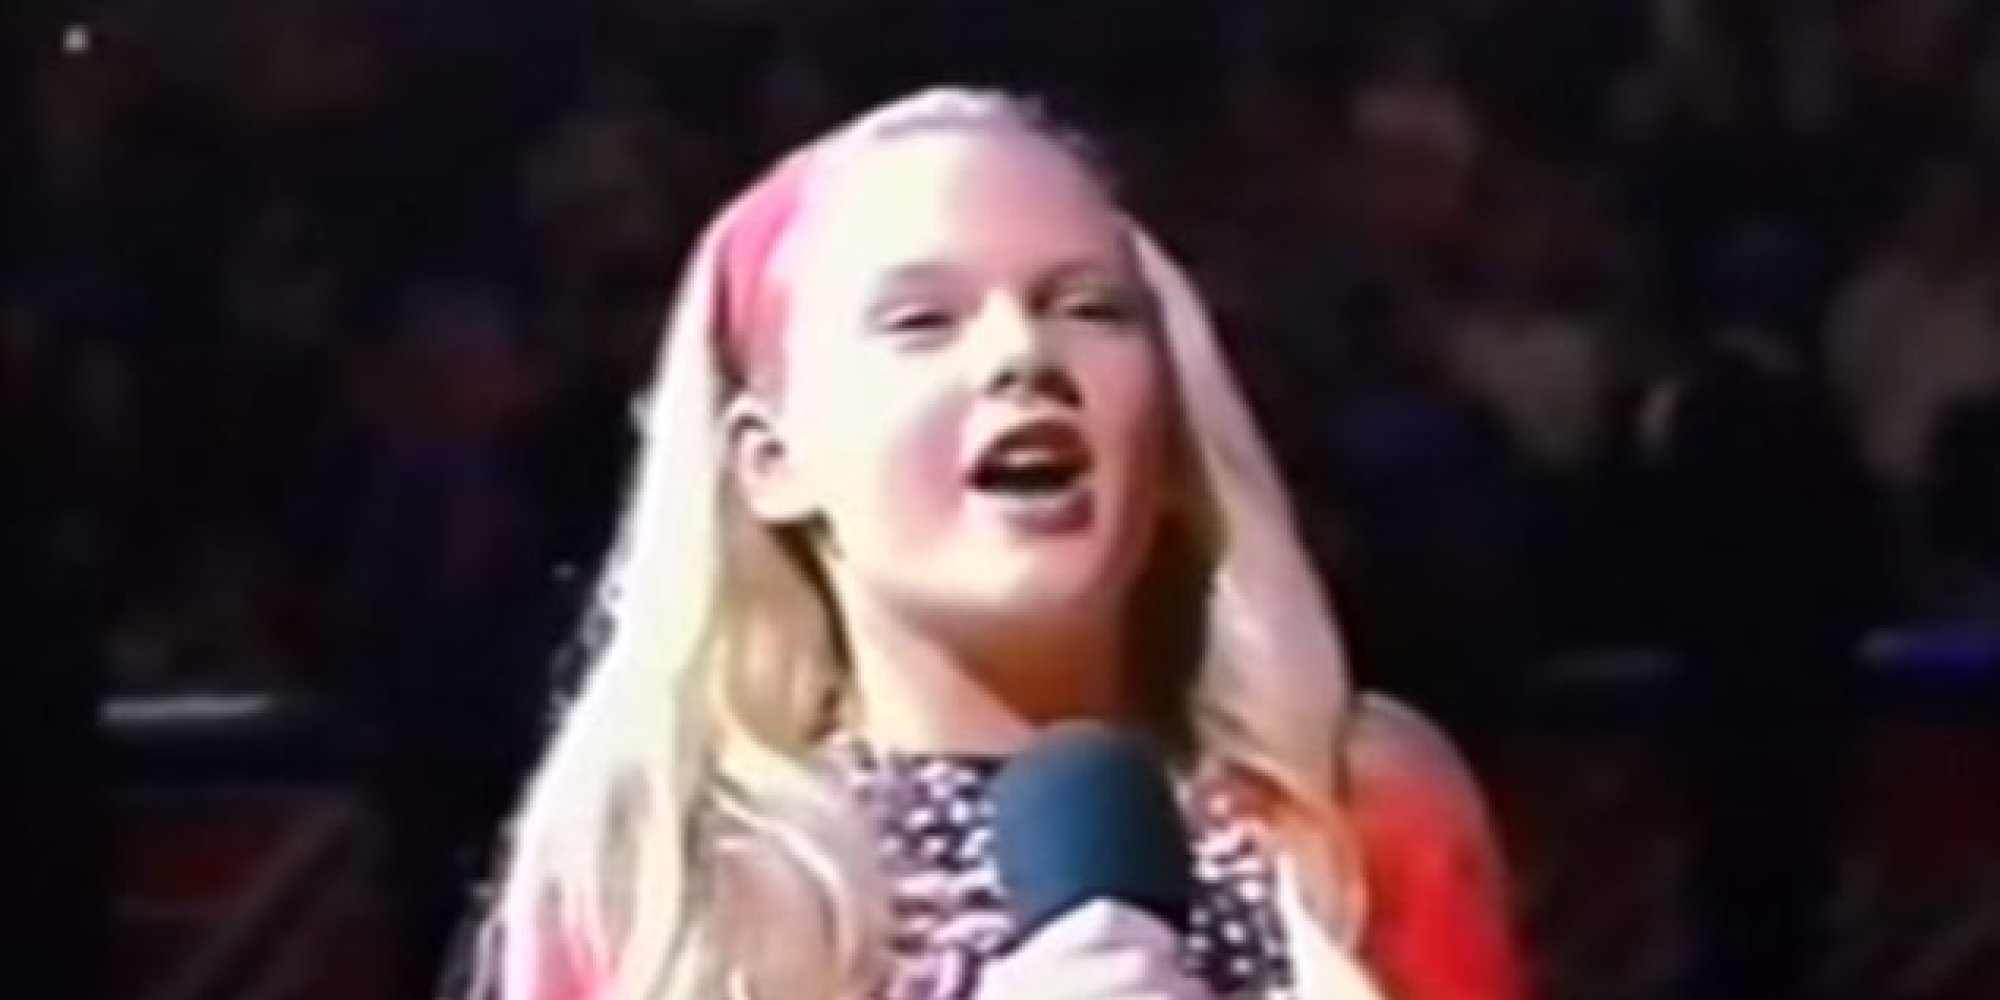 This Is 12-Year-Old Taylor Swift Singing The National Anthem | HuffPost